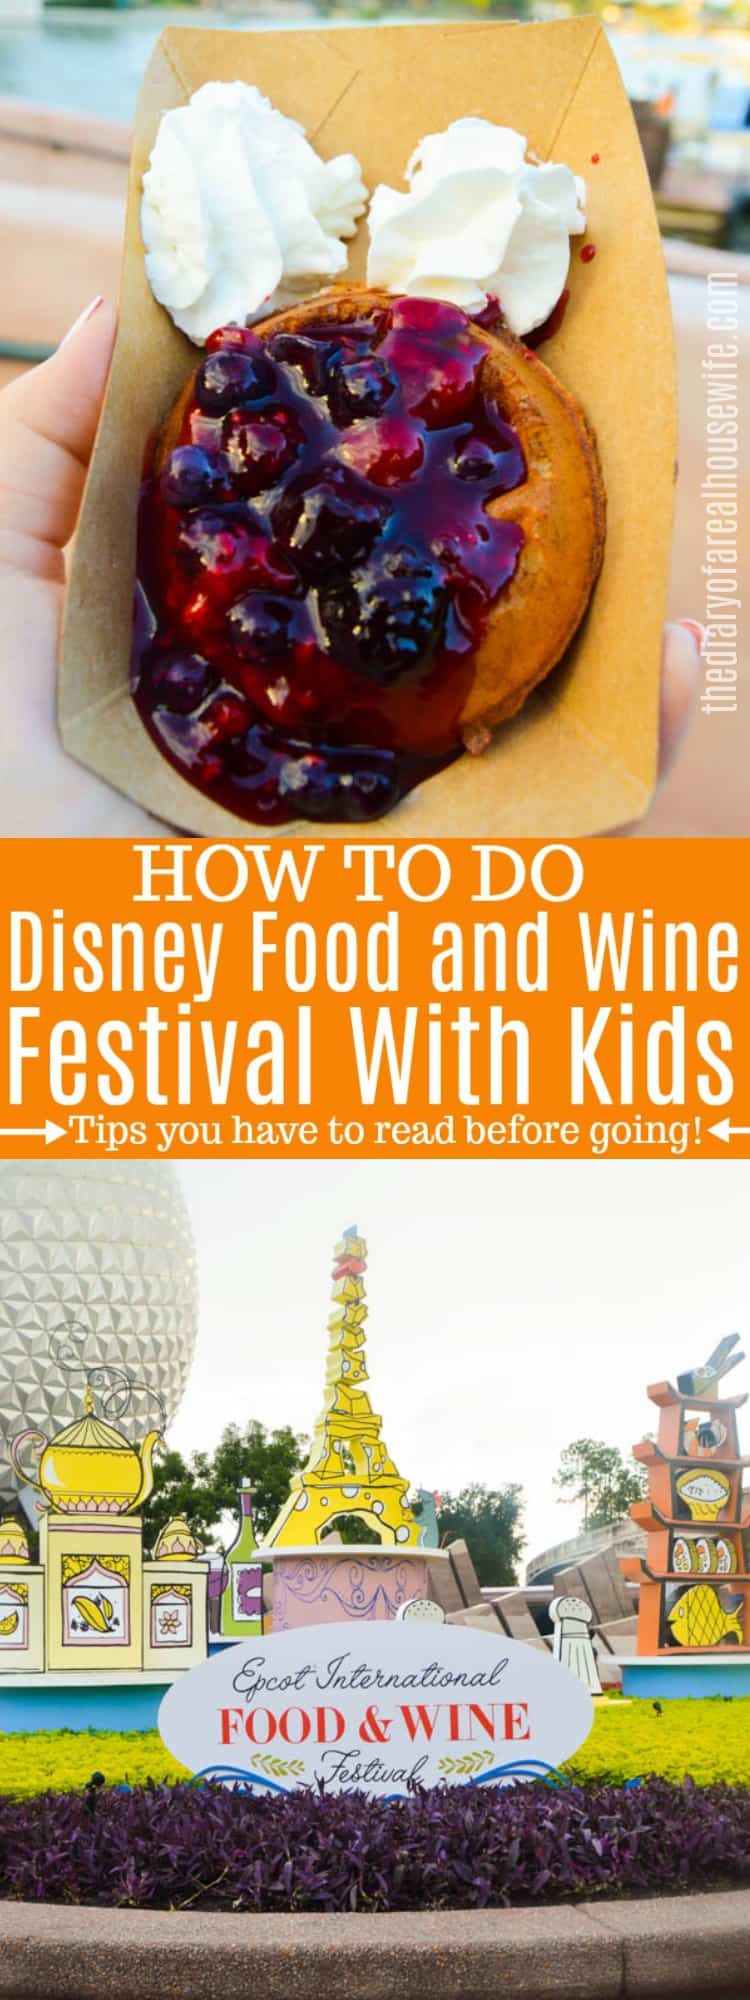 Disney Food and Wine Festival Tips